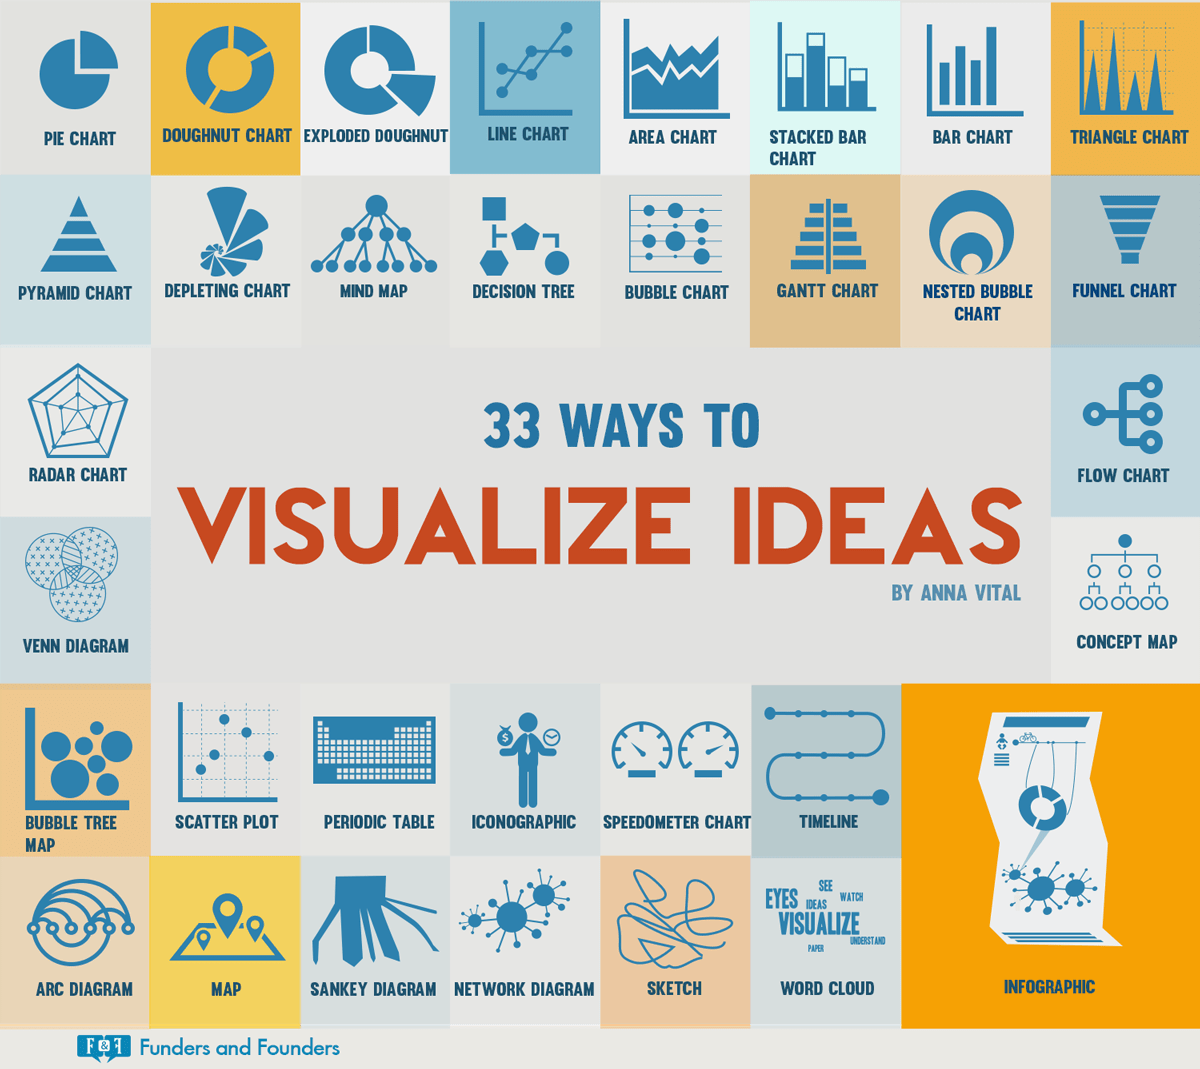 33 Ways to Visualize Ideas Choose among different charts, diagrams, and visual techniques to visualize your ideas. If you can see it, you can do it.